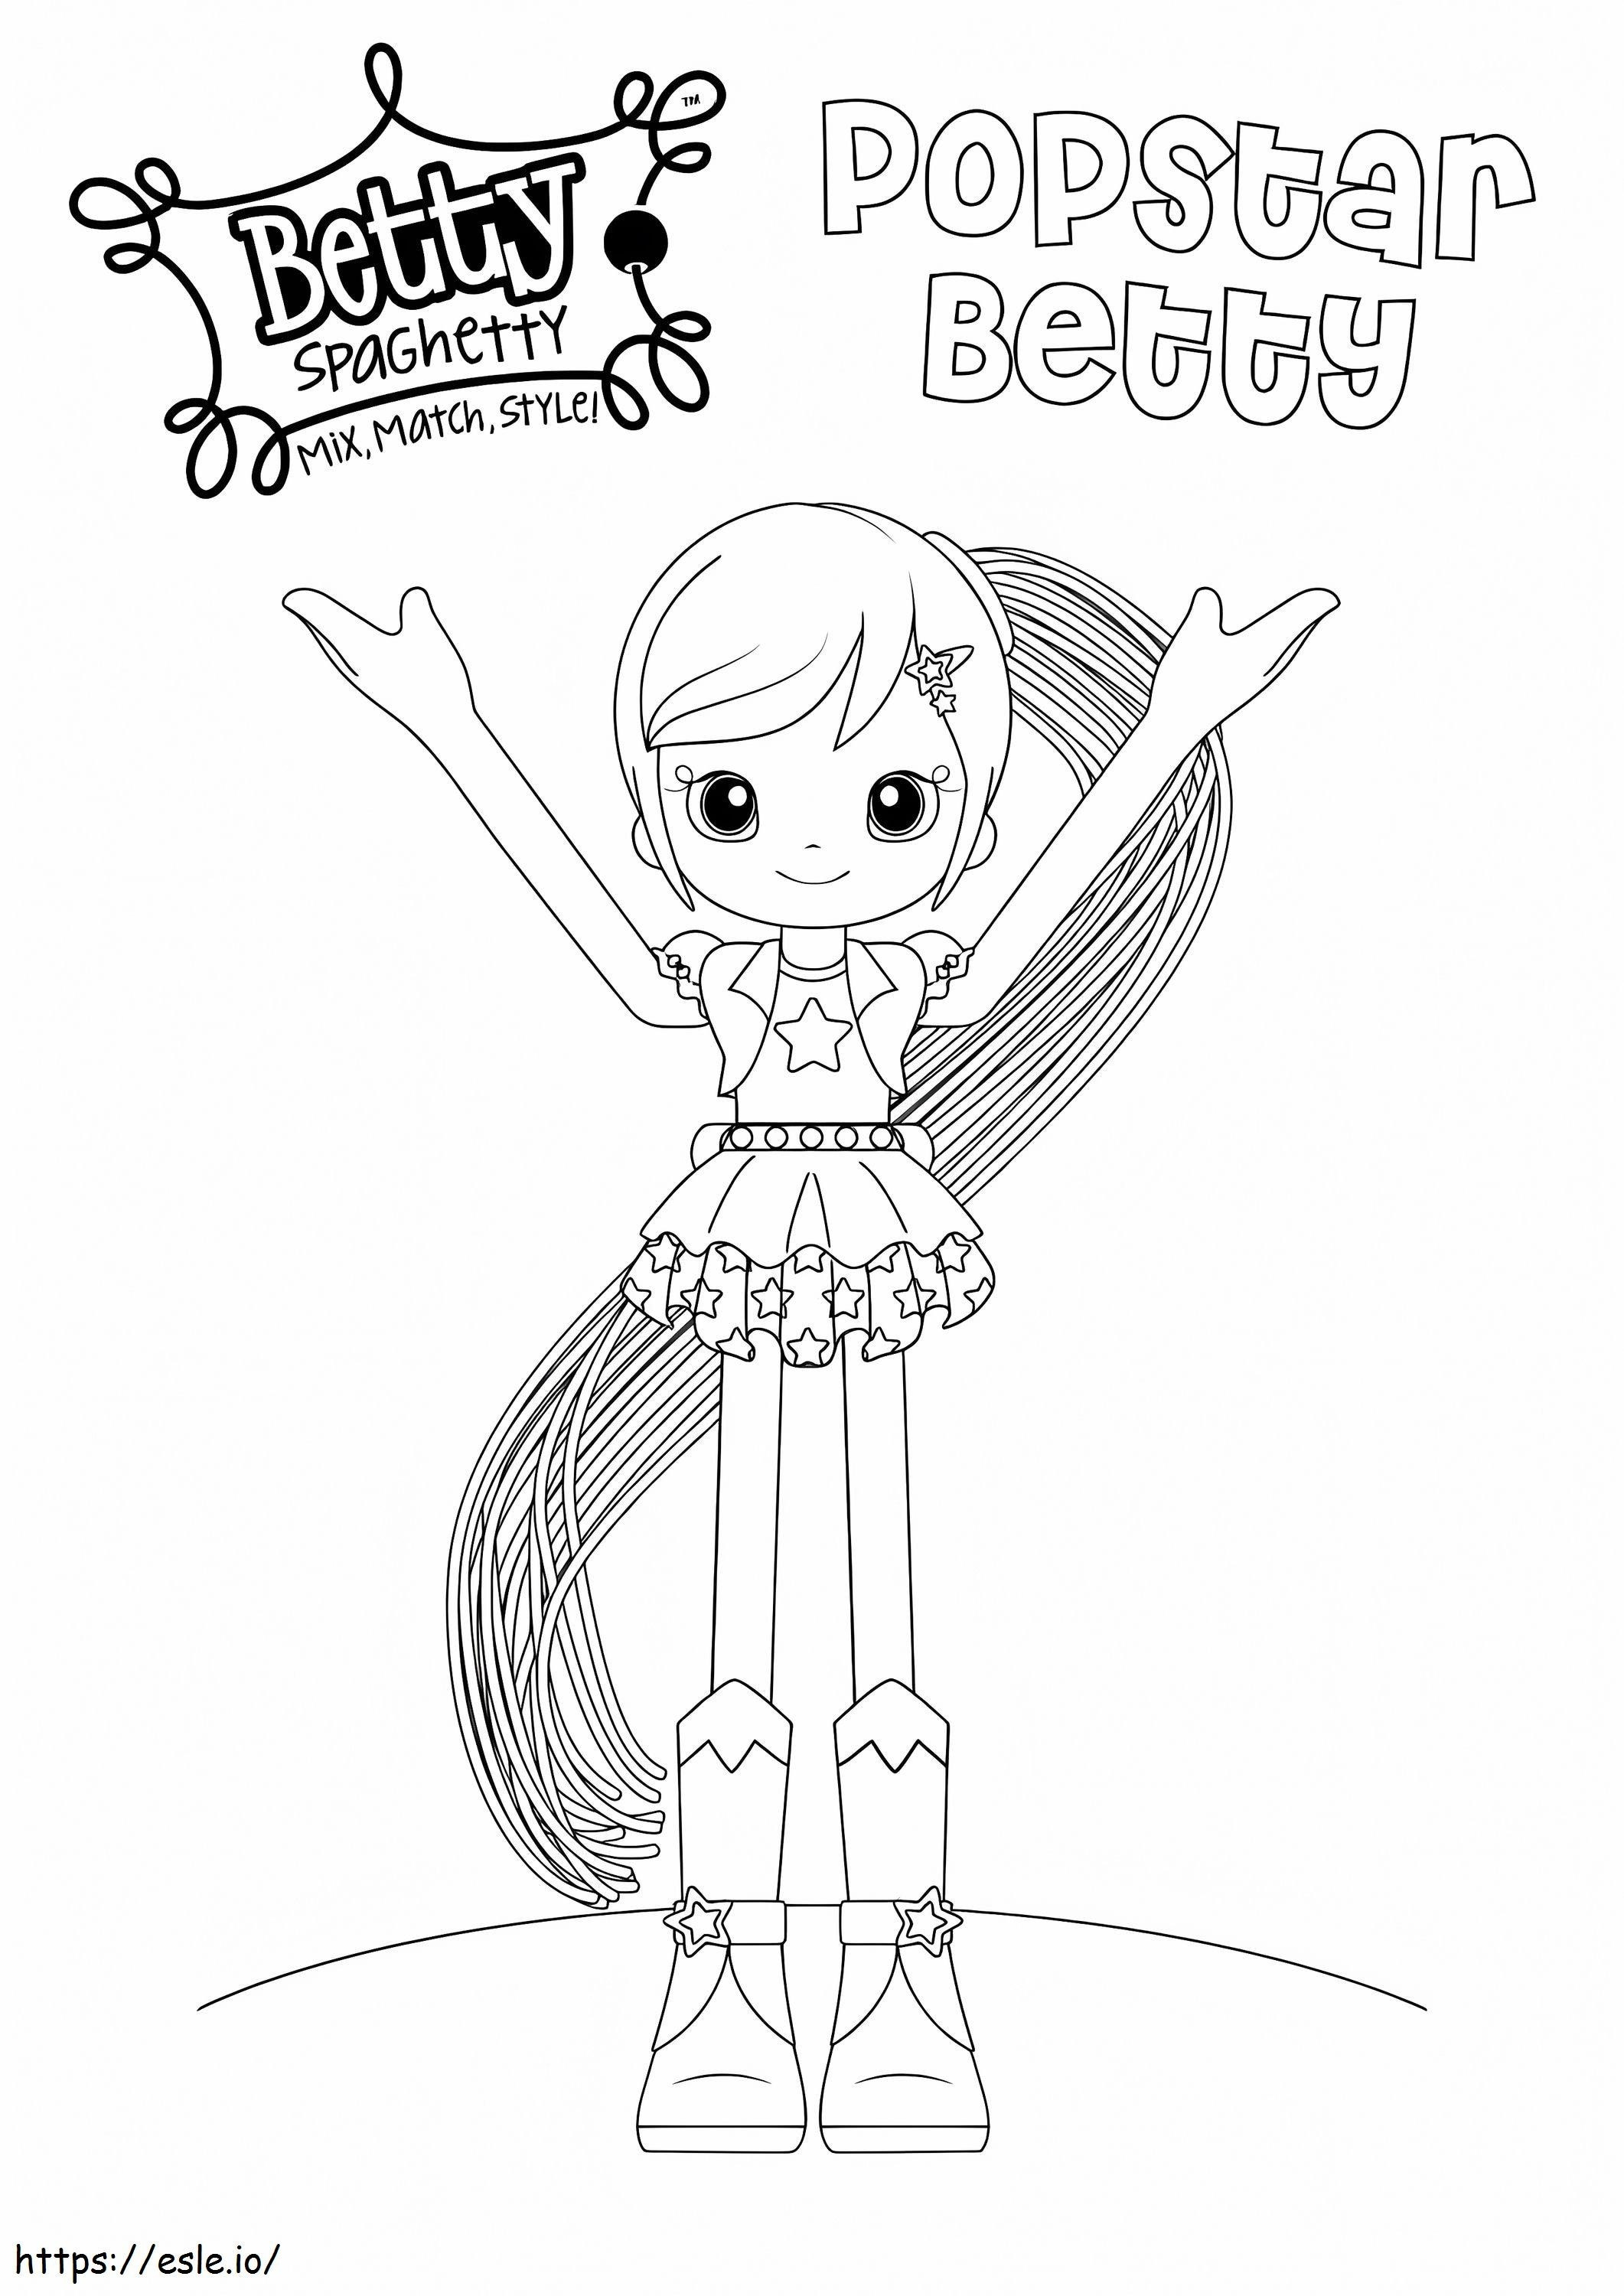 Popstar Betty coloring page